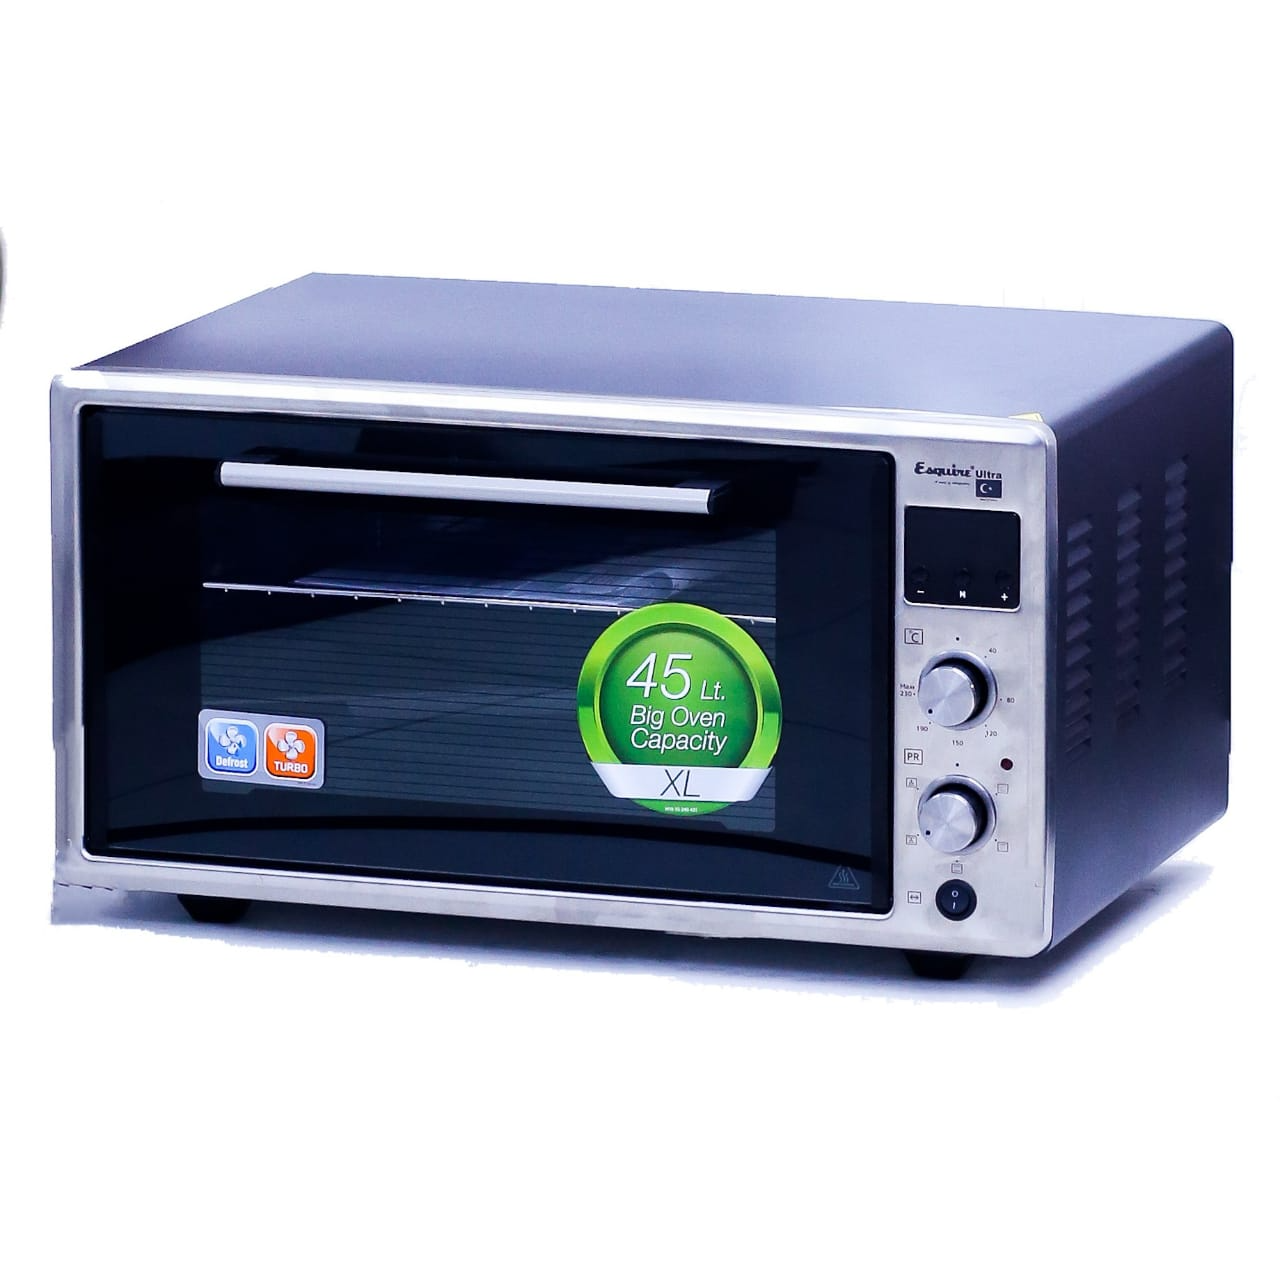 ESQUIRE ELECTRIC OVEN M4552R01